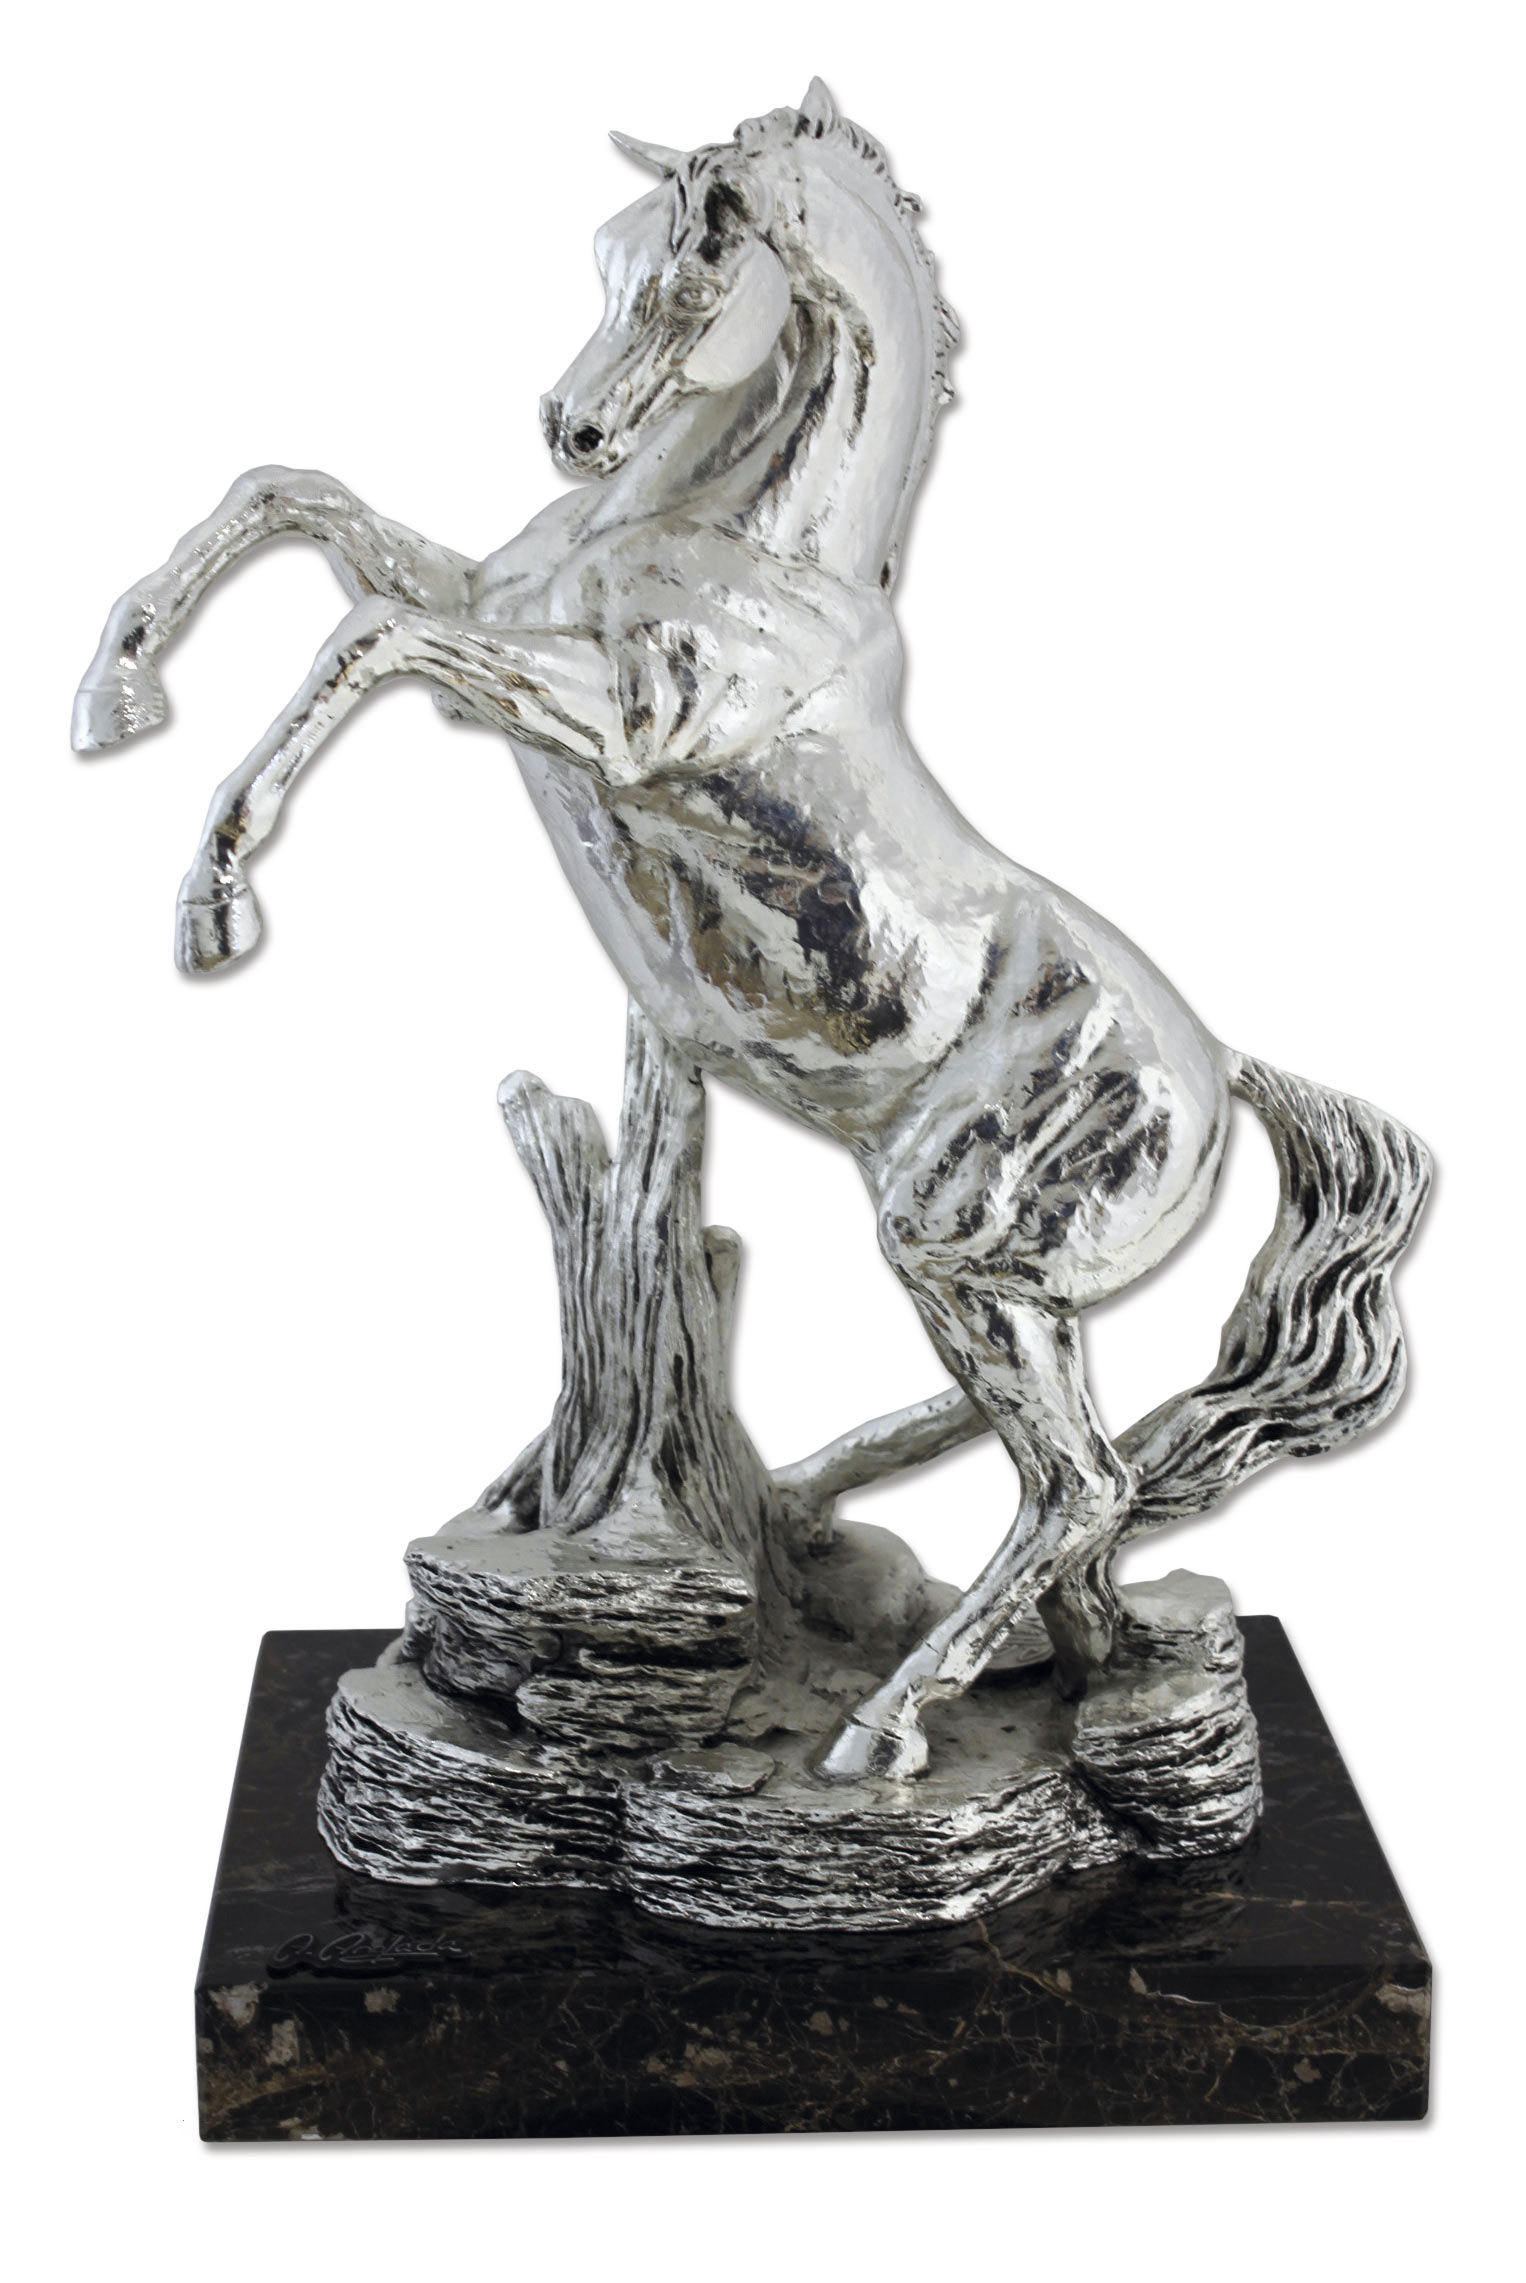 ref: 571P - SILVER REARING HORSE - 9 1/4 x 6 3/4 x 13 1/4